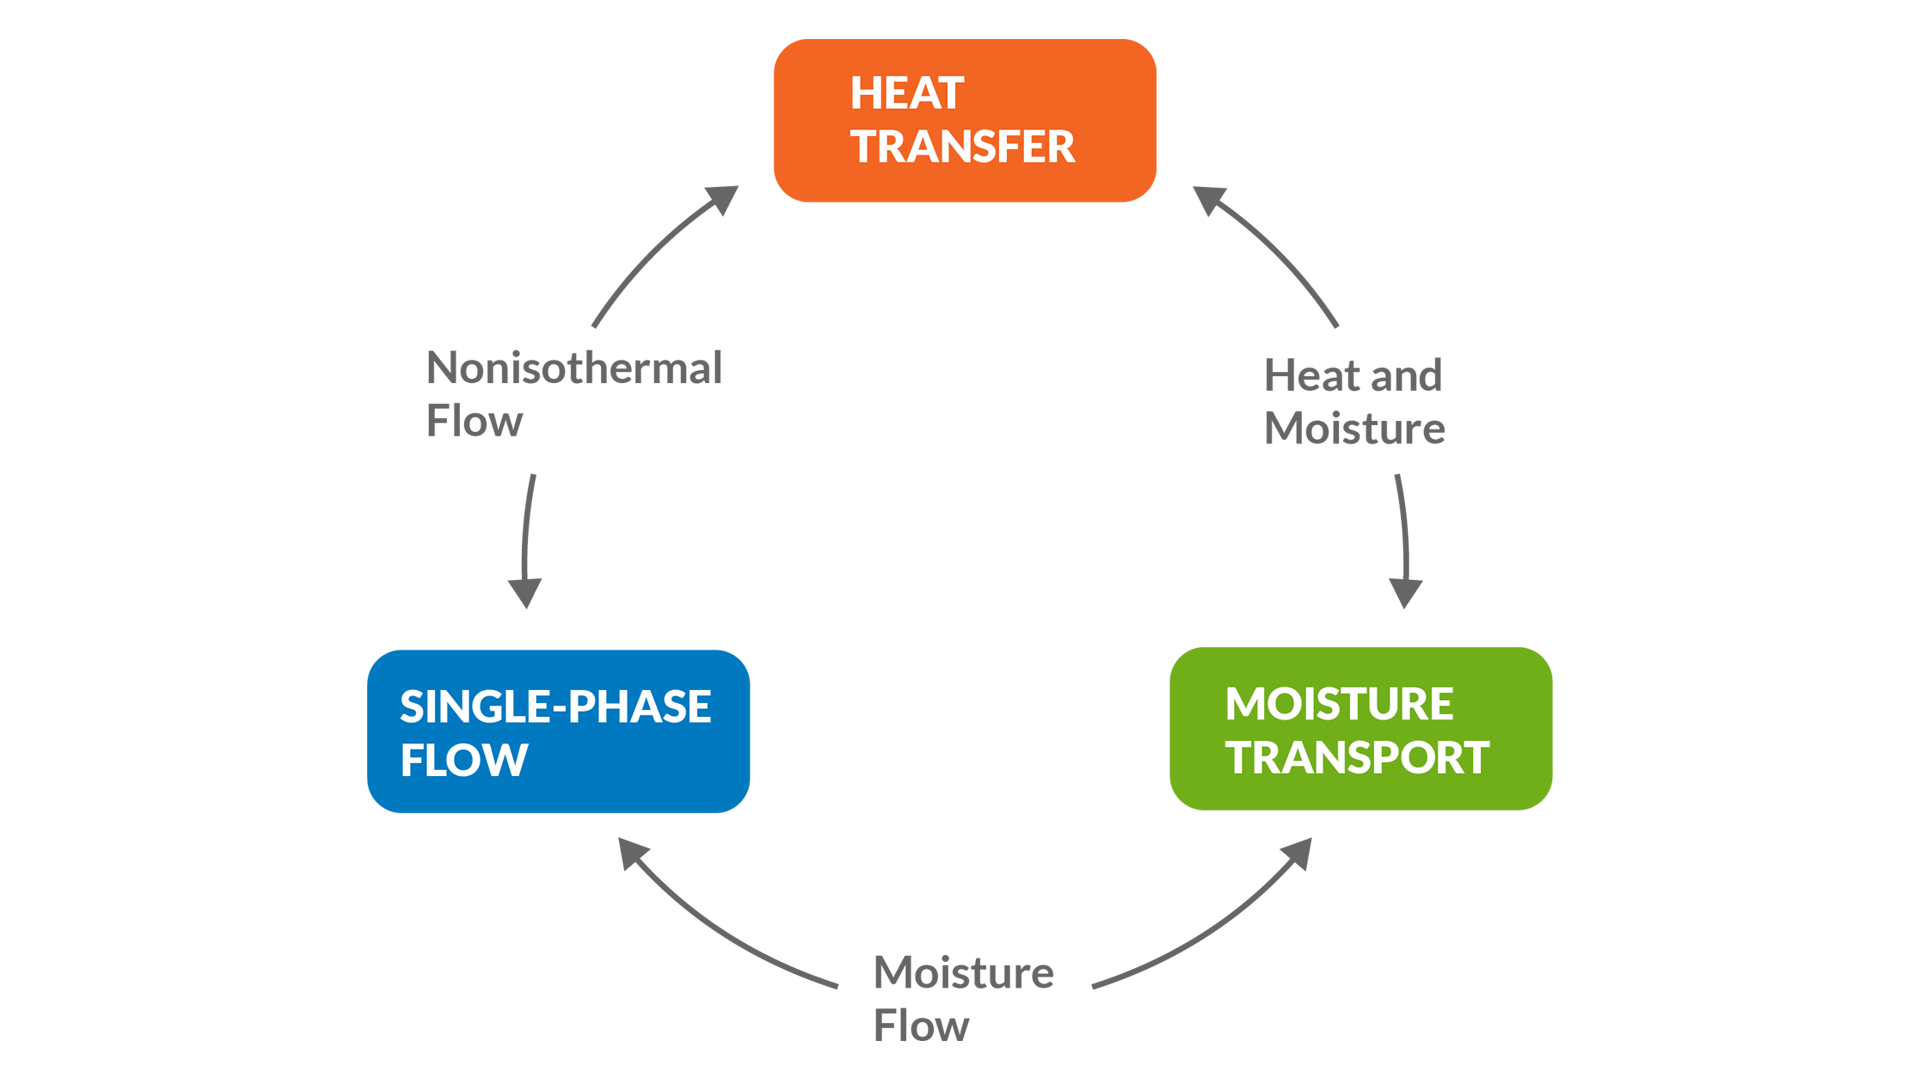 The Moisture Flow coupling completes a comprehensive multiphysics approach to modeling moisture flow in air with the Heat Transfer Module.